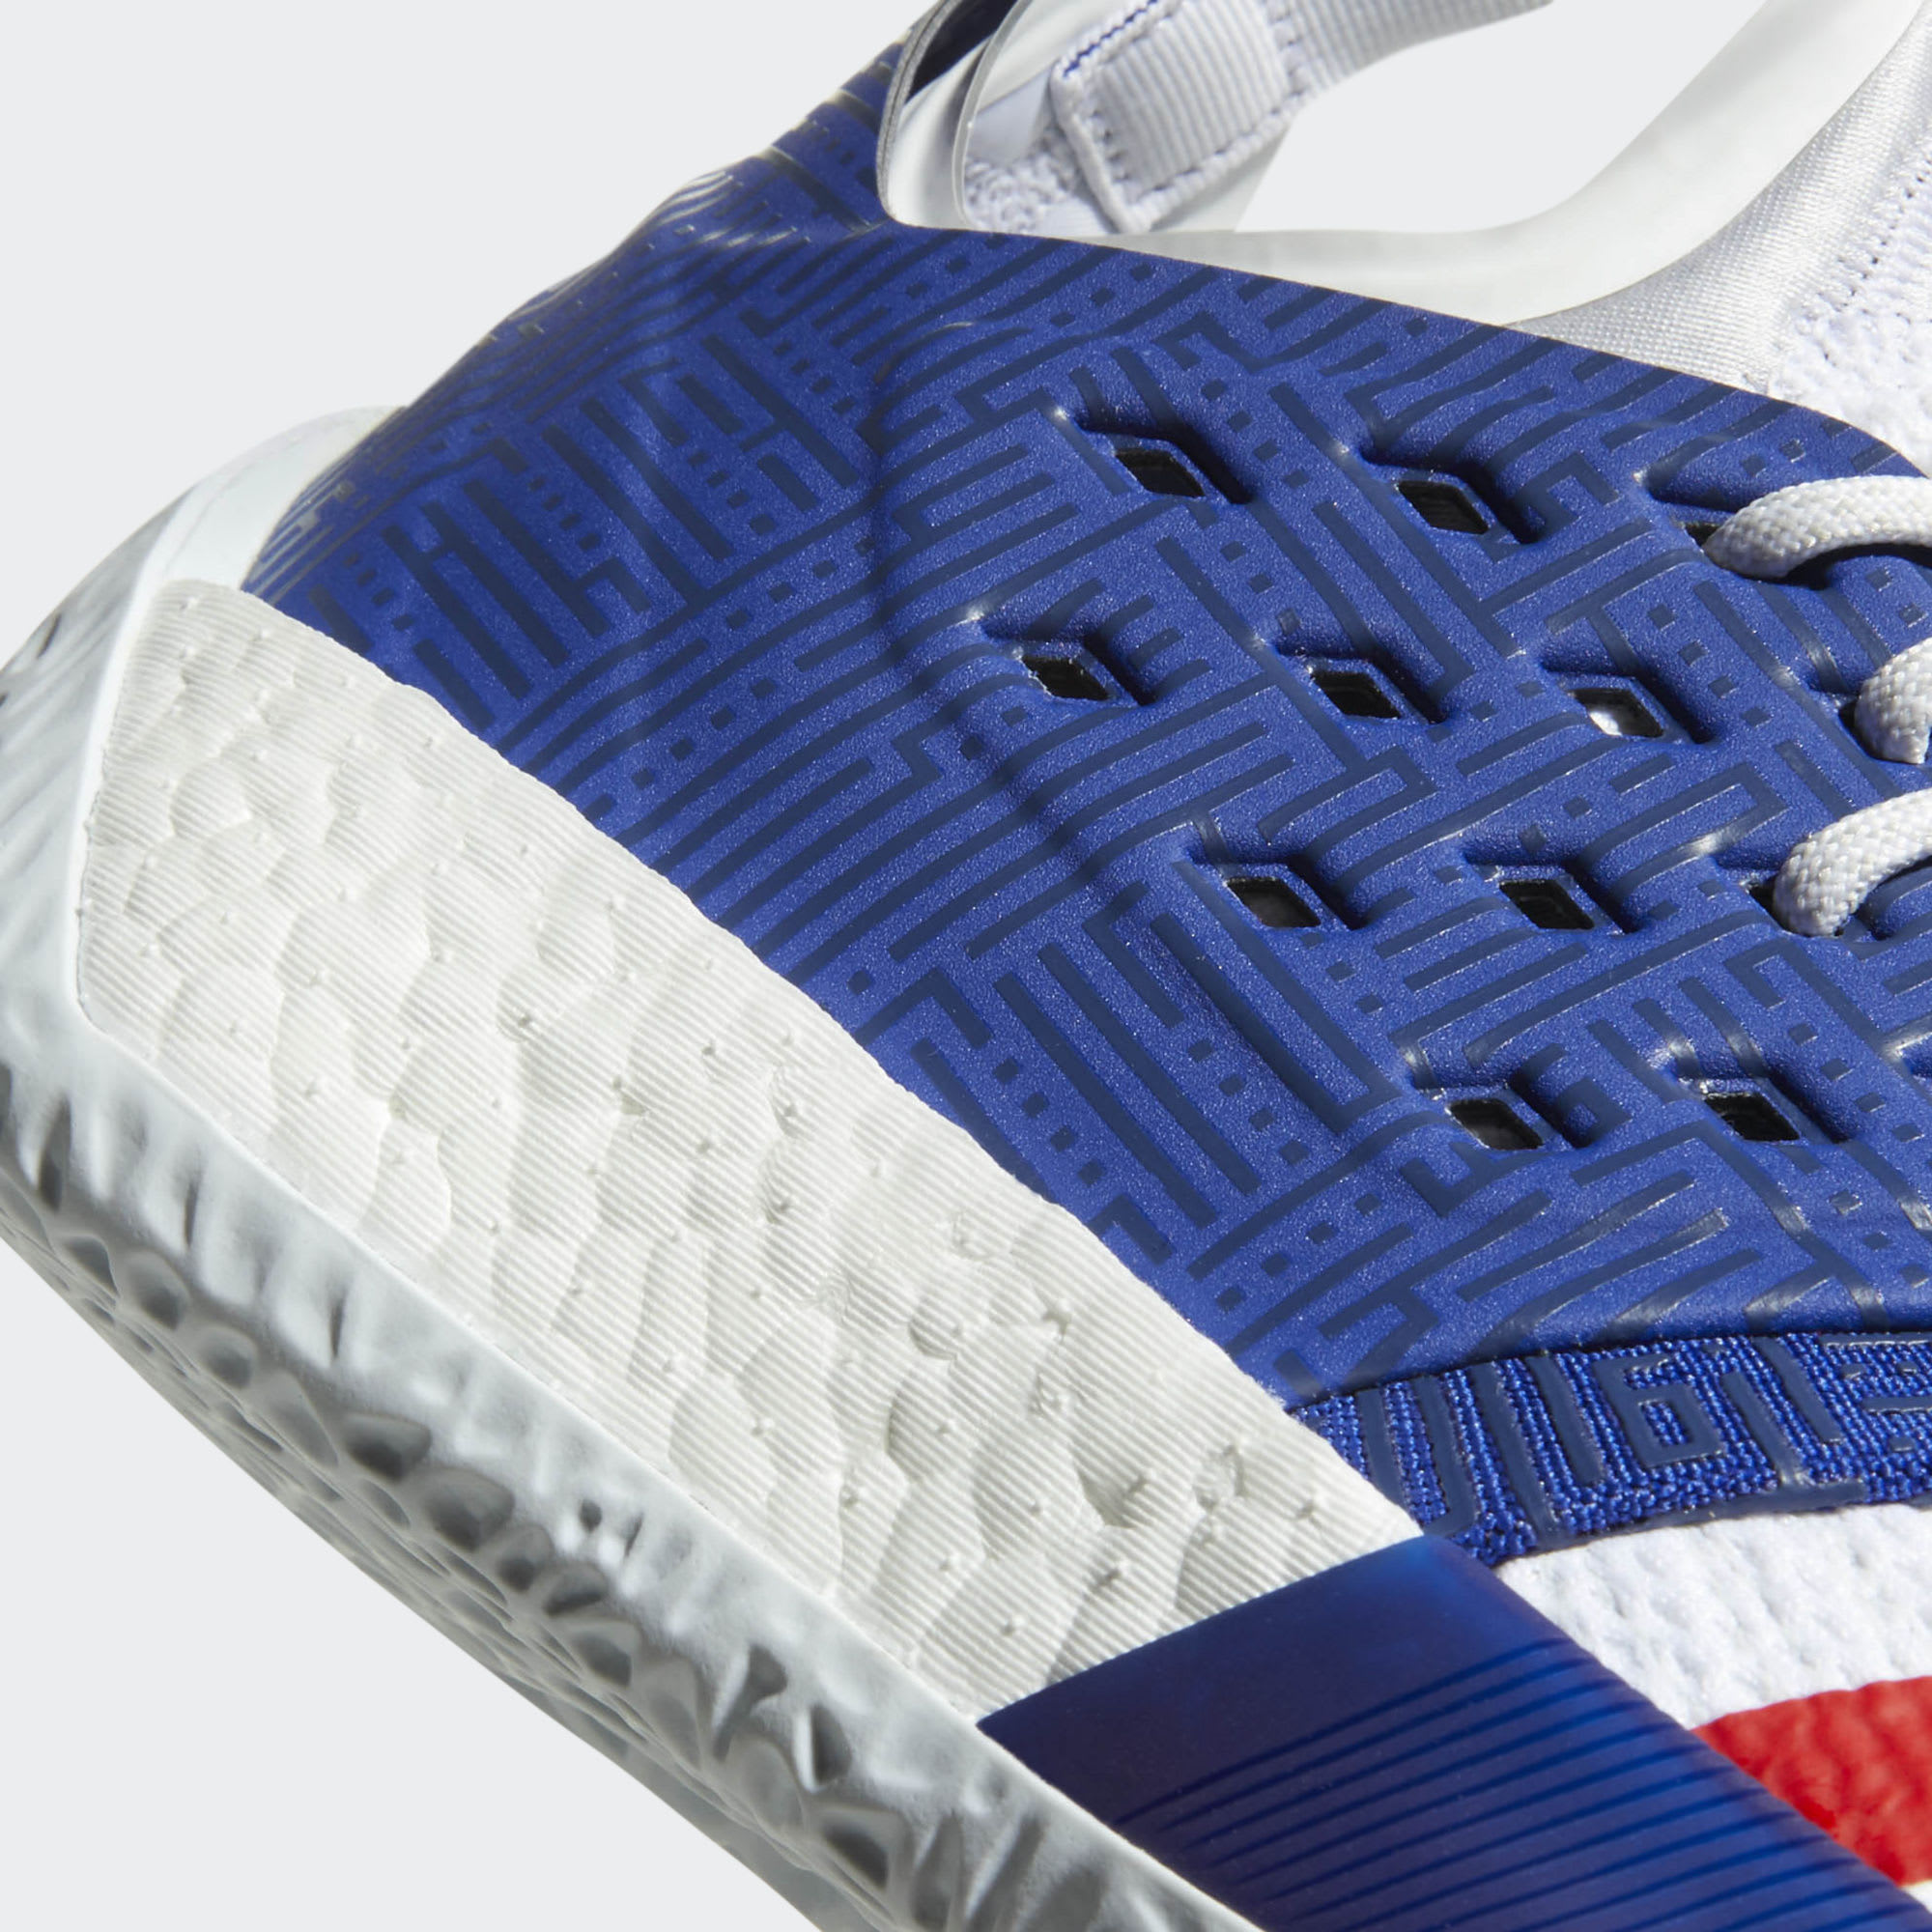 adidas-harden-vol-2-red-white-blue-aq0026-release-date-detail